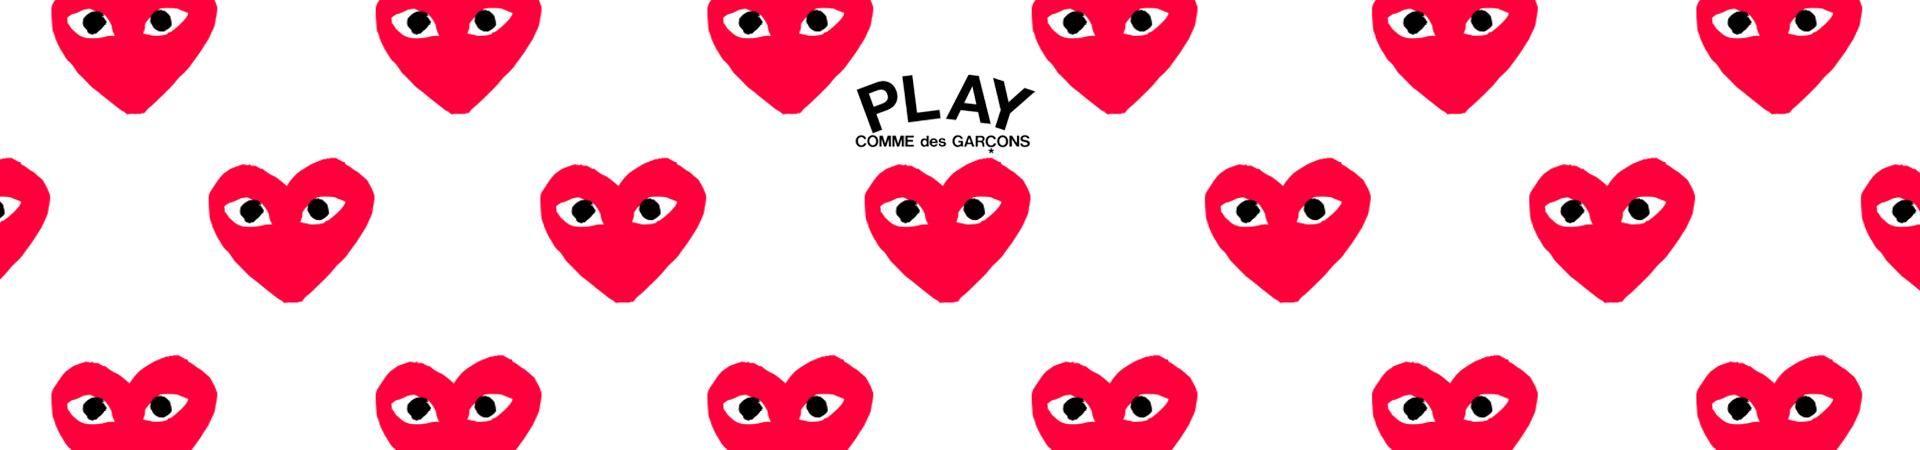 COMME des GARCONS Wallpaper by Canibaljay on DeviantArt